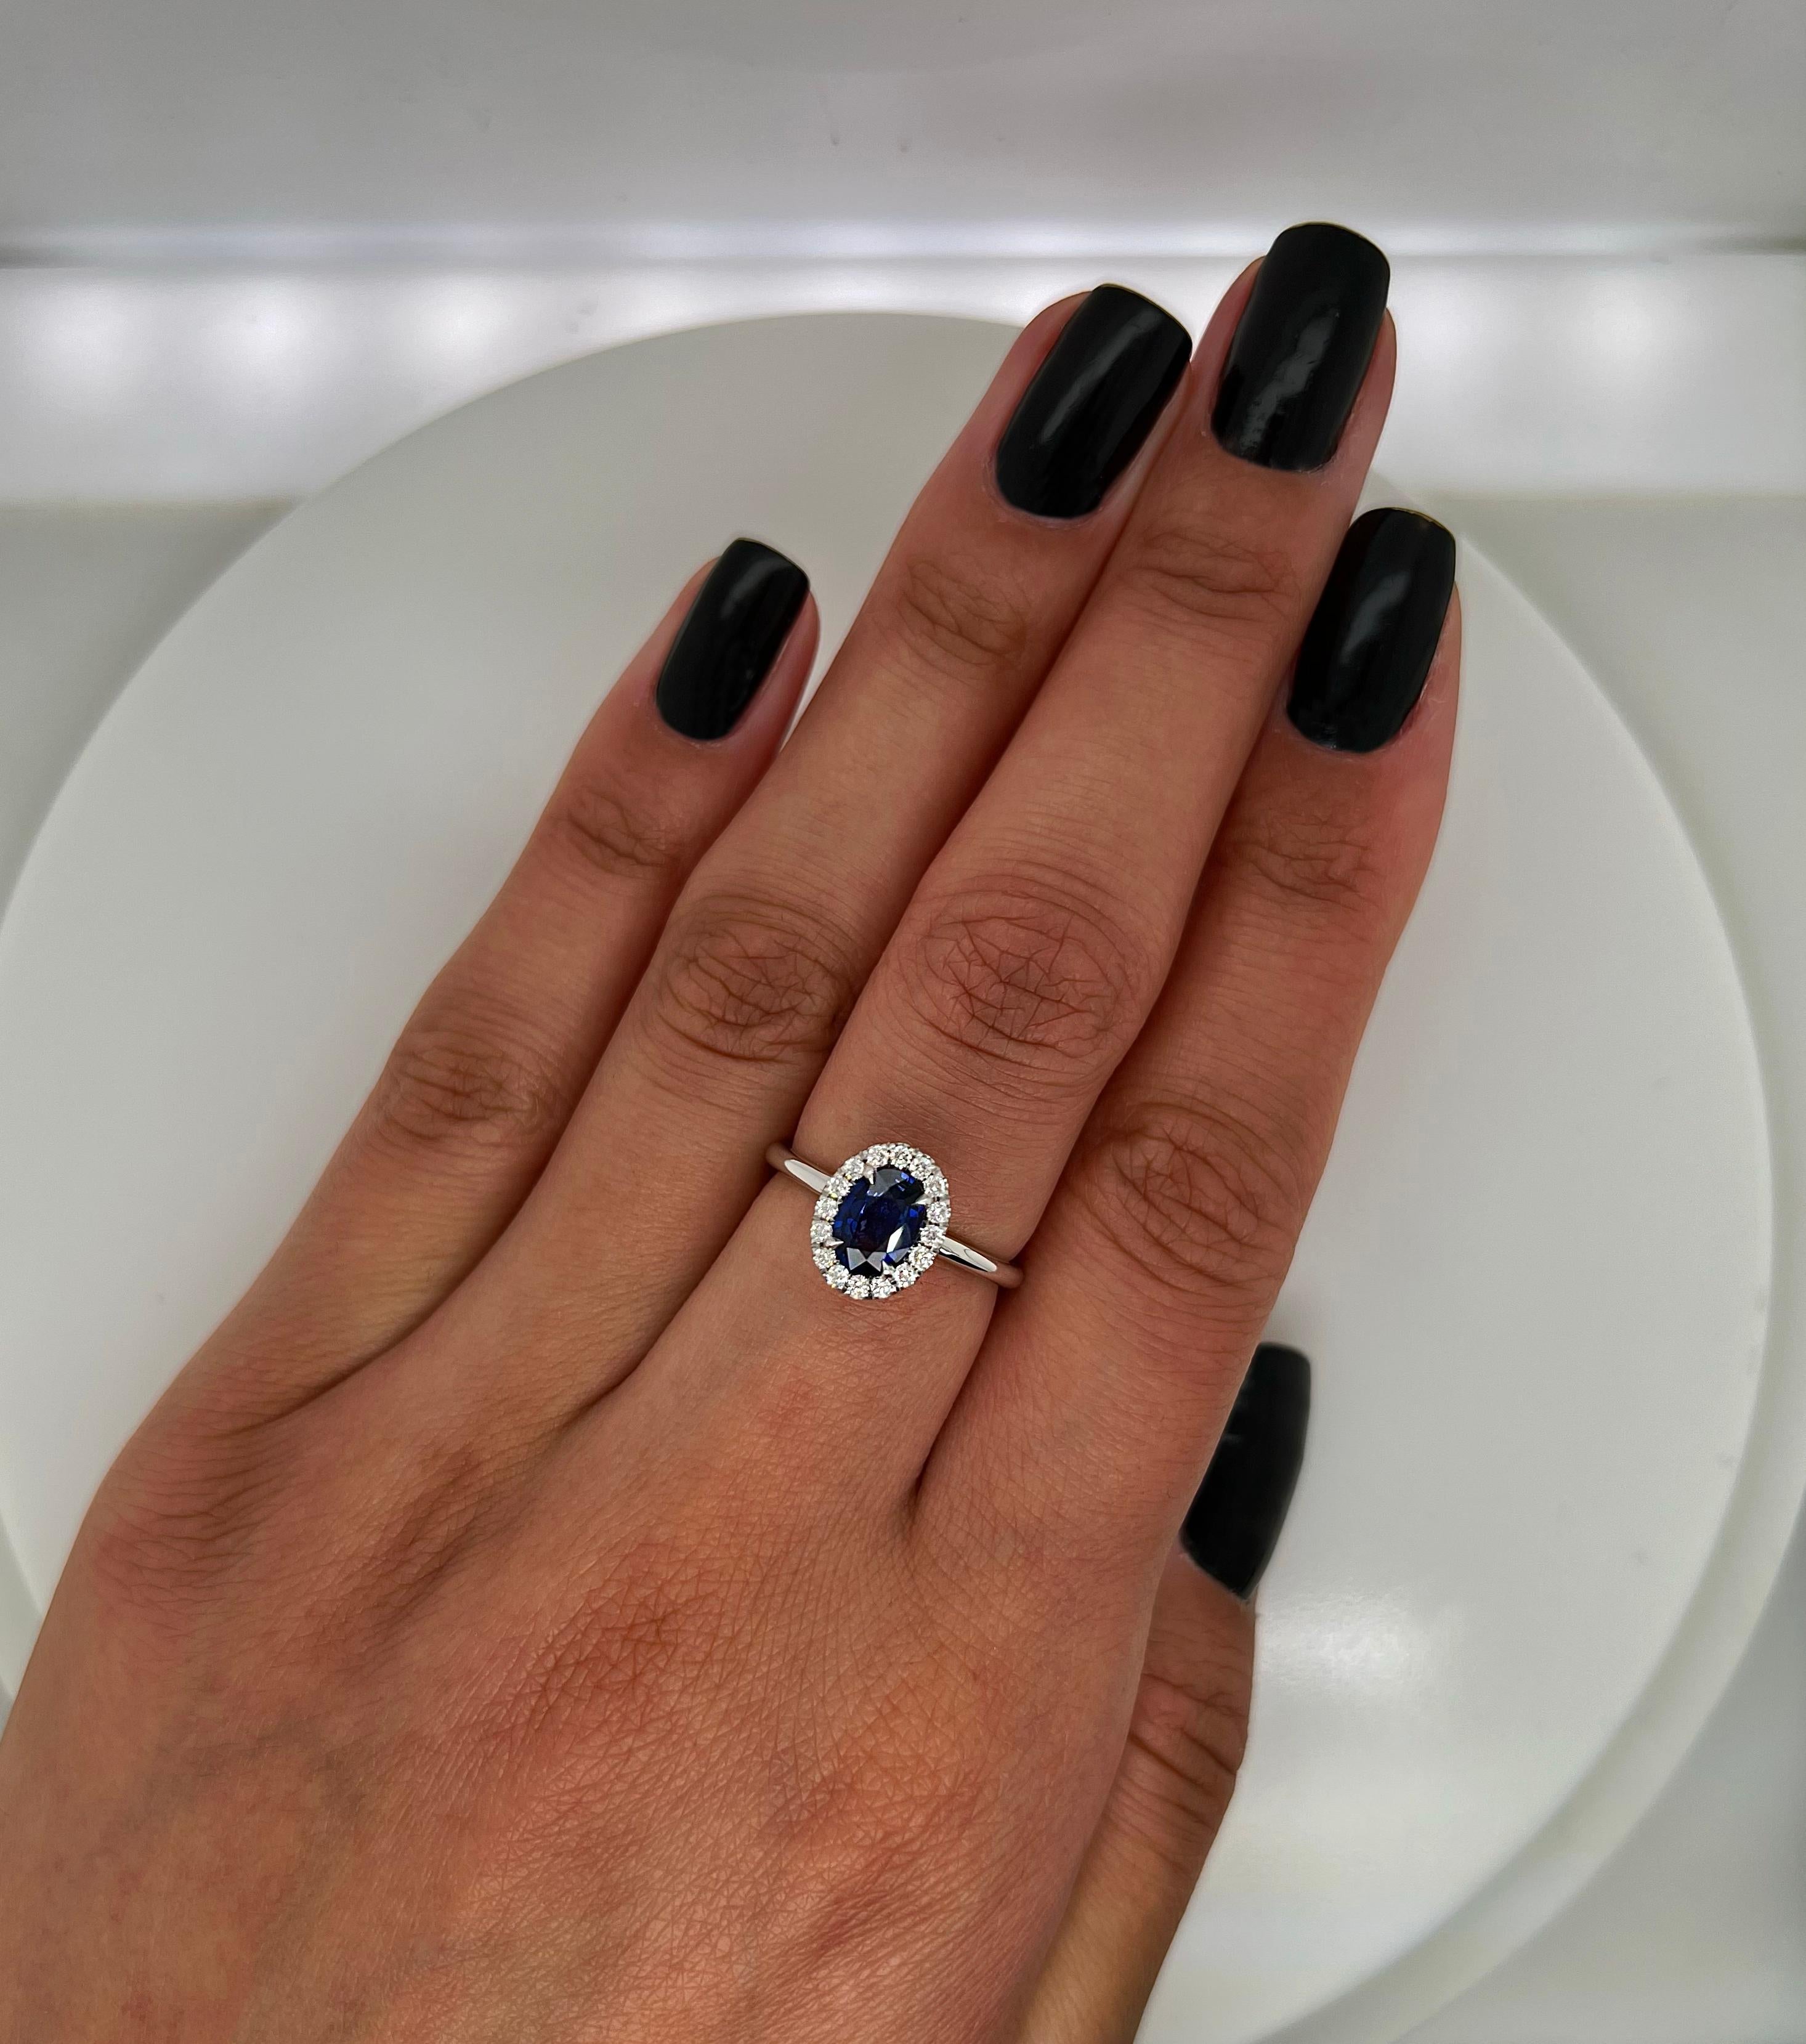 Oval Cut 1.14 Total Carat Sapphire Diamond Ladies Halo Ring For Sale